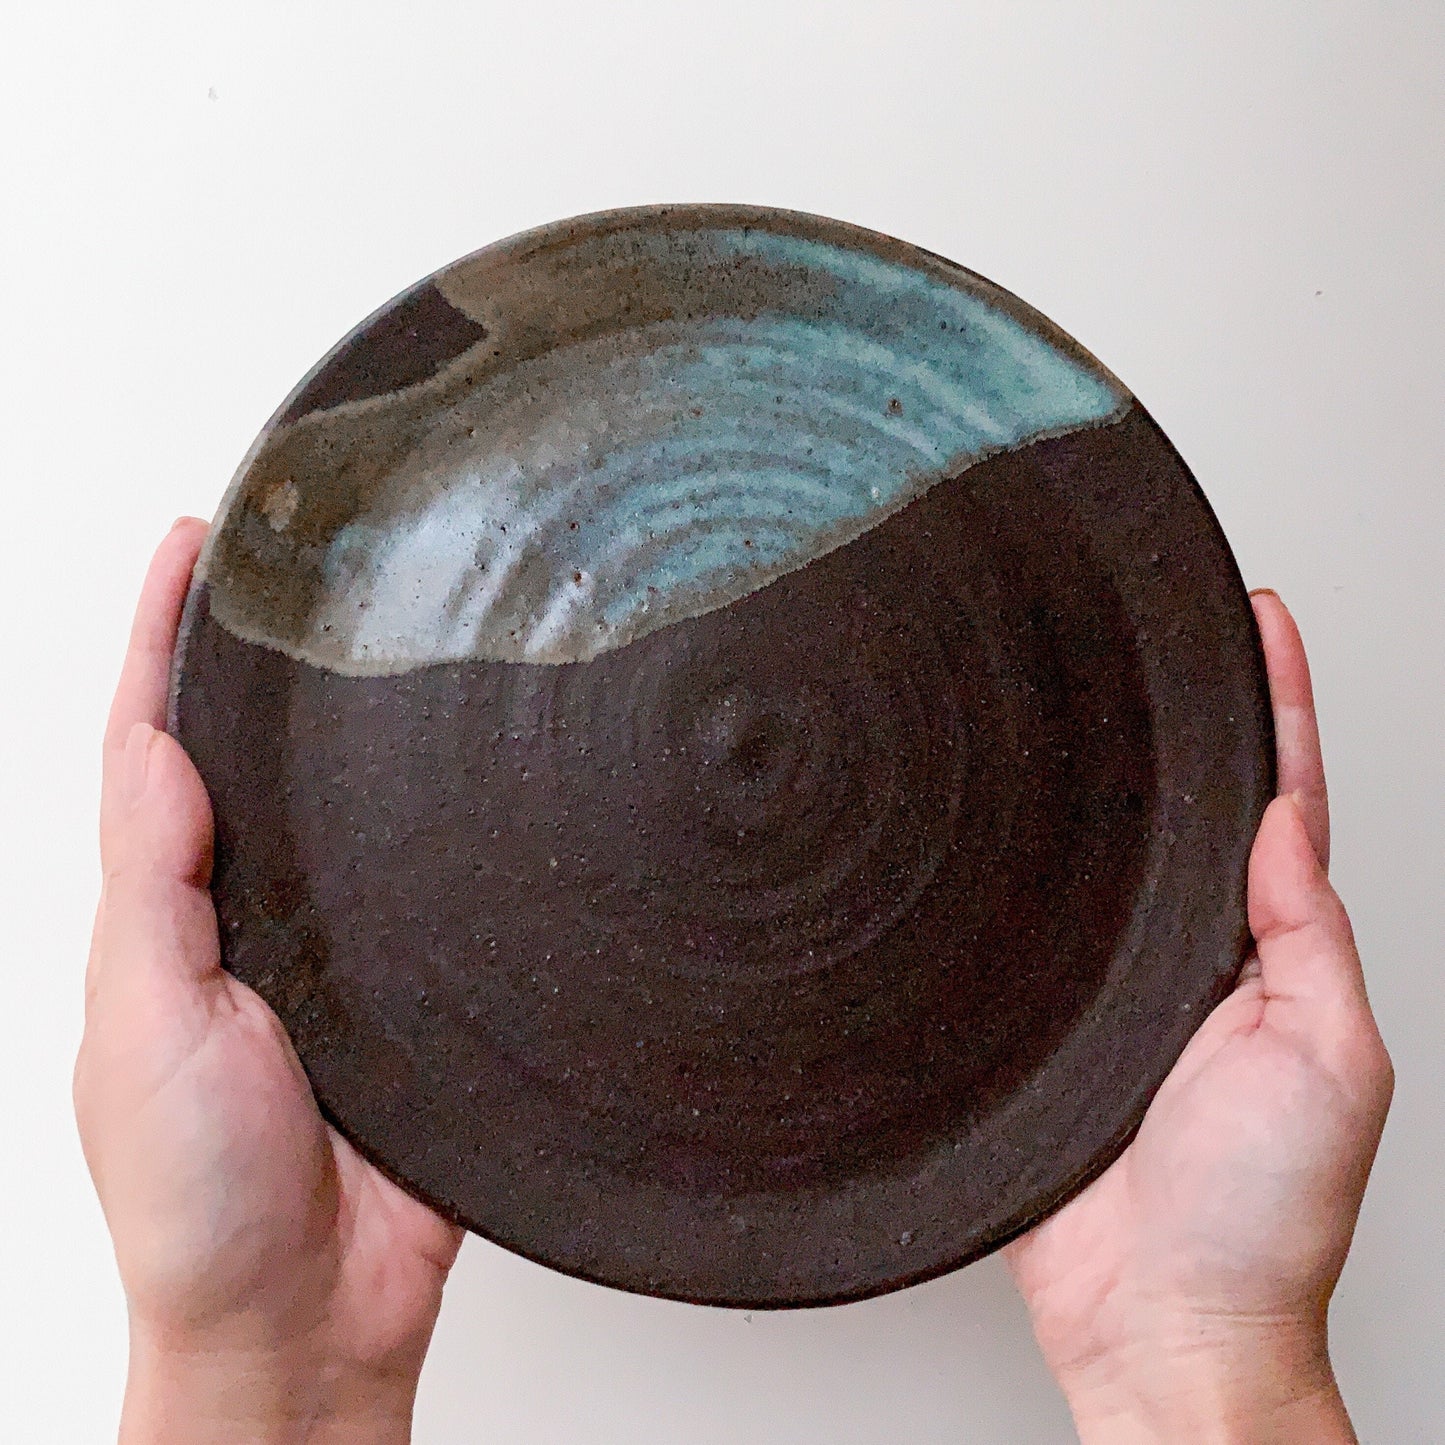 Pottery plate in matt brown color with shiny blue splash